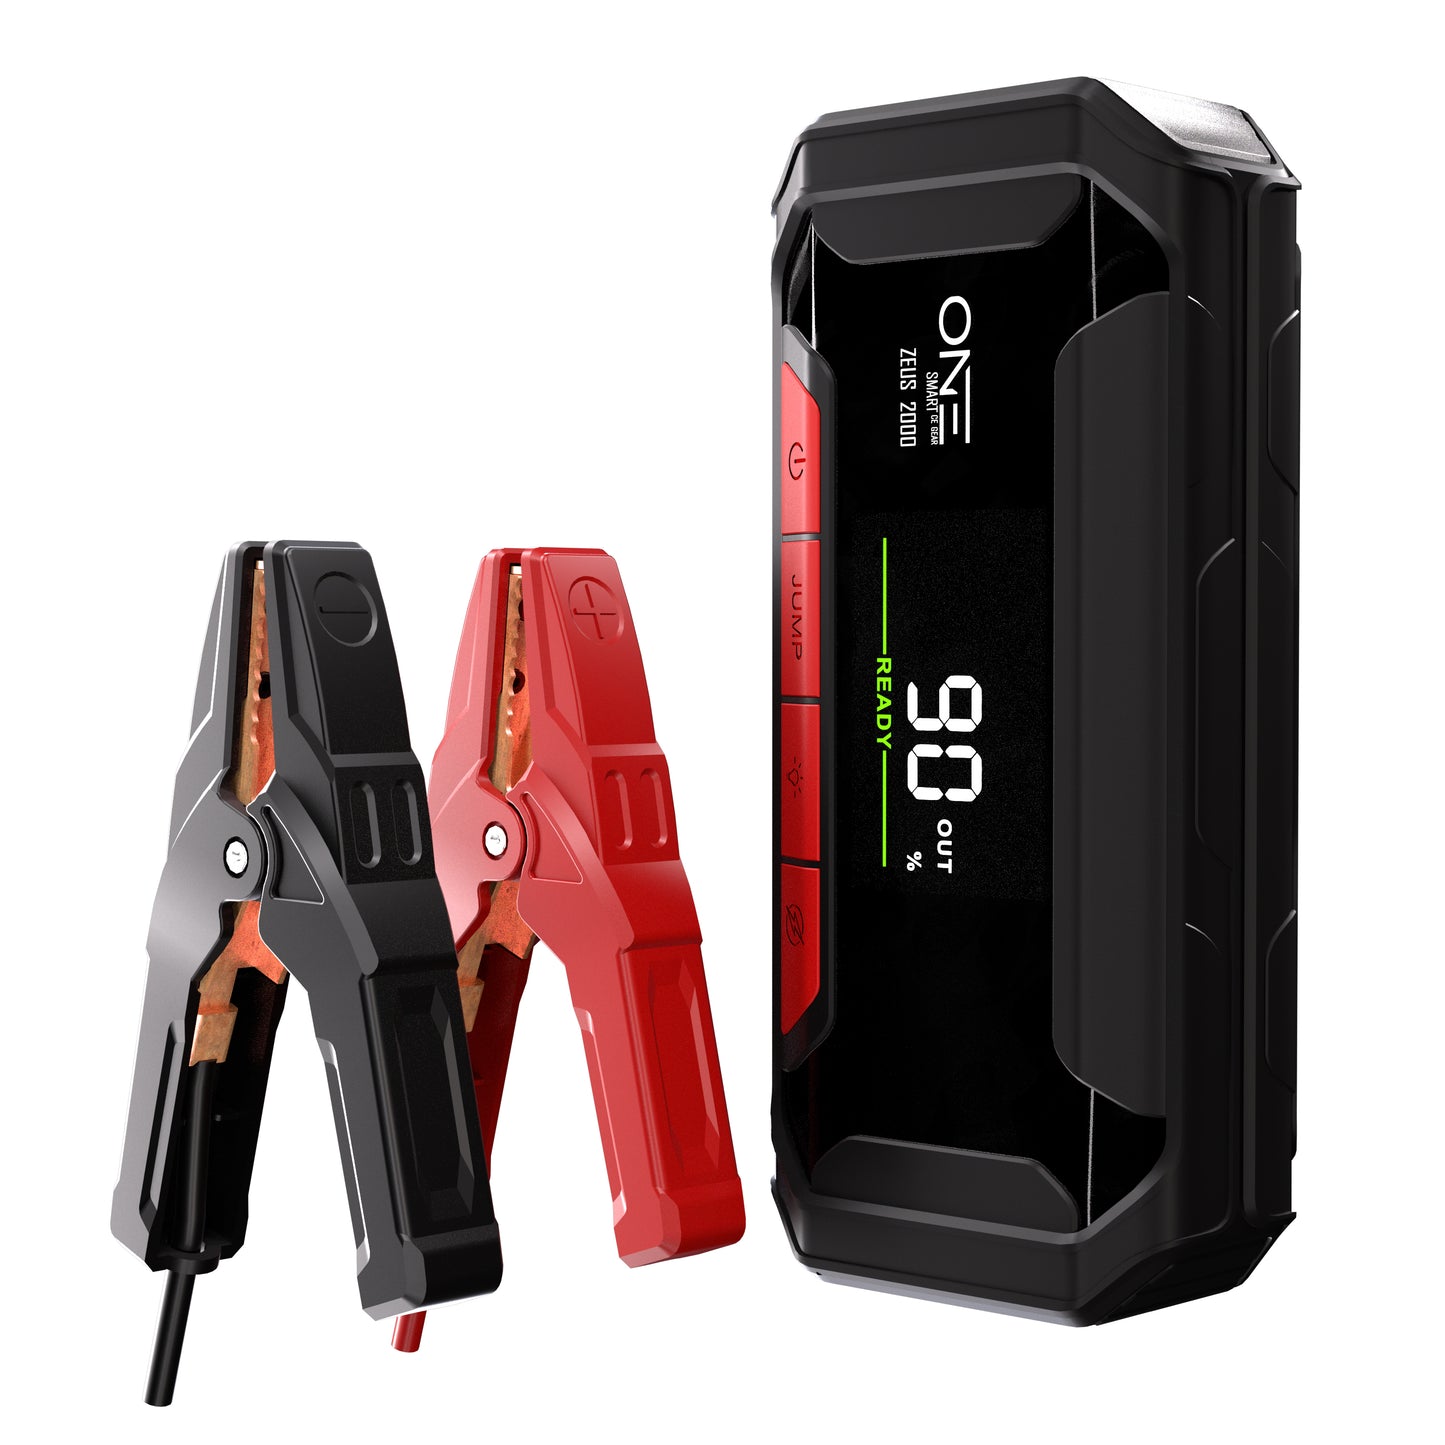 ONE Jump Starter 2000A Peak Battery Pack, Ultrasafe Car Battery Jumpstarter, 12V Jump Box for Battery up to 8.5L Gas/6L Diesel Engine, Battery Booster 65W Fast Charger, Portable Hard Case/Dust Tight(OAJS-2001)